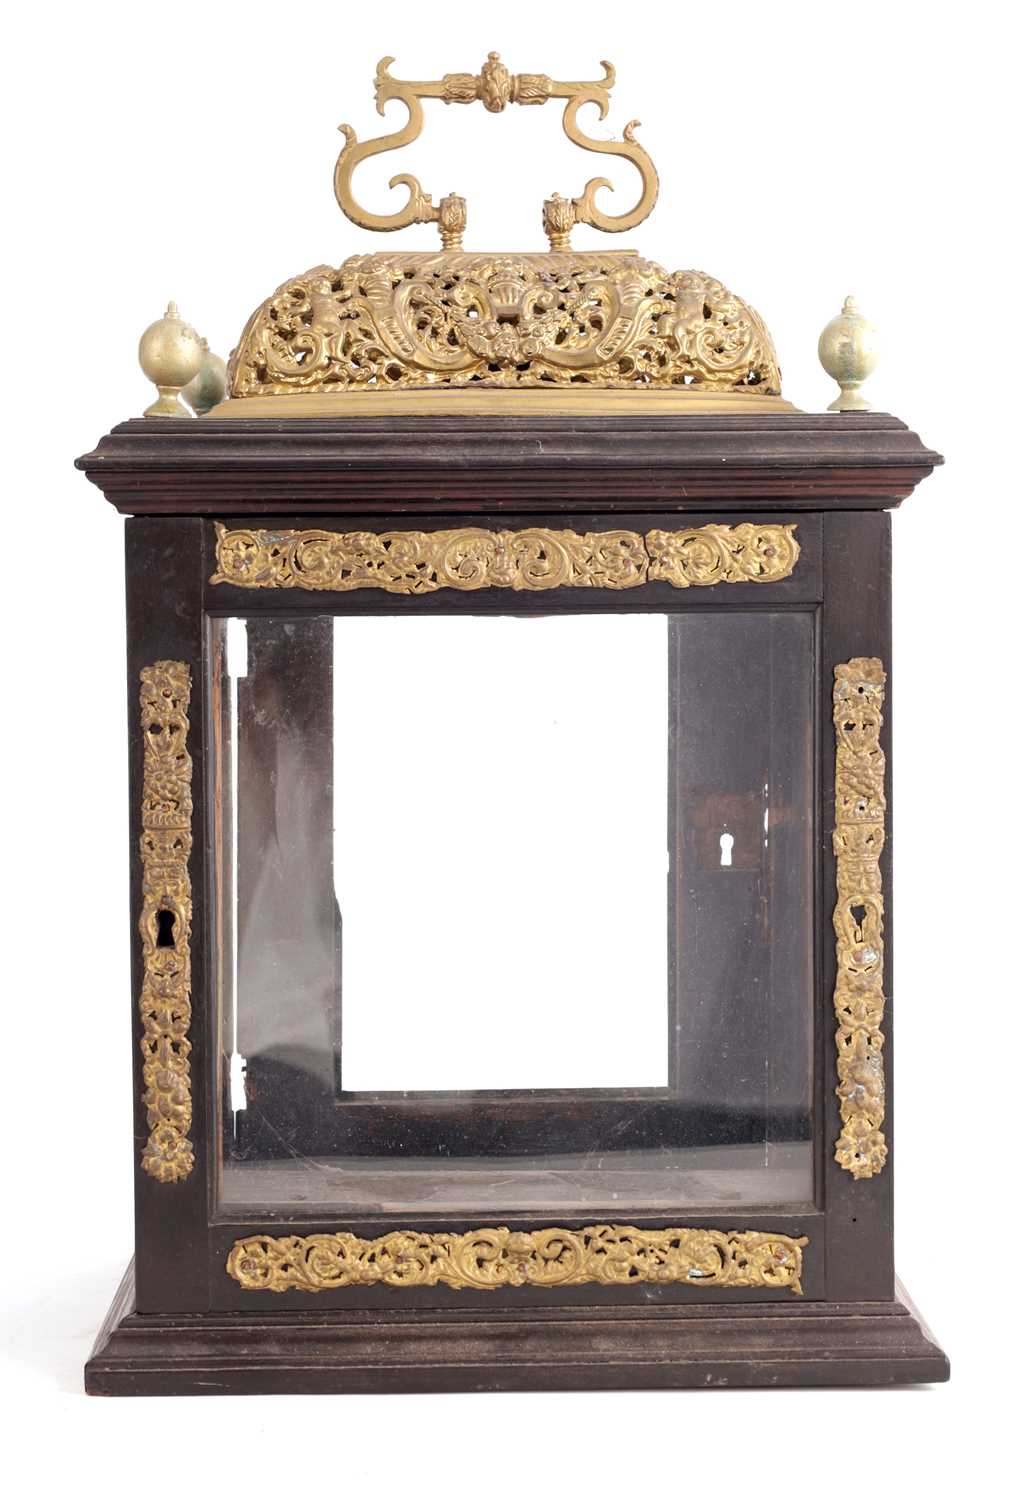 Lot 888 - A WILLIAM AND MARY EBONISED BASKET TOP BRACKET CLOCK CASE